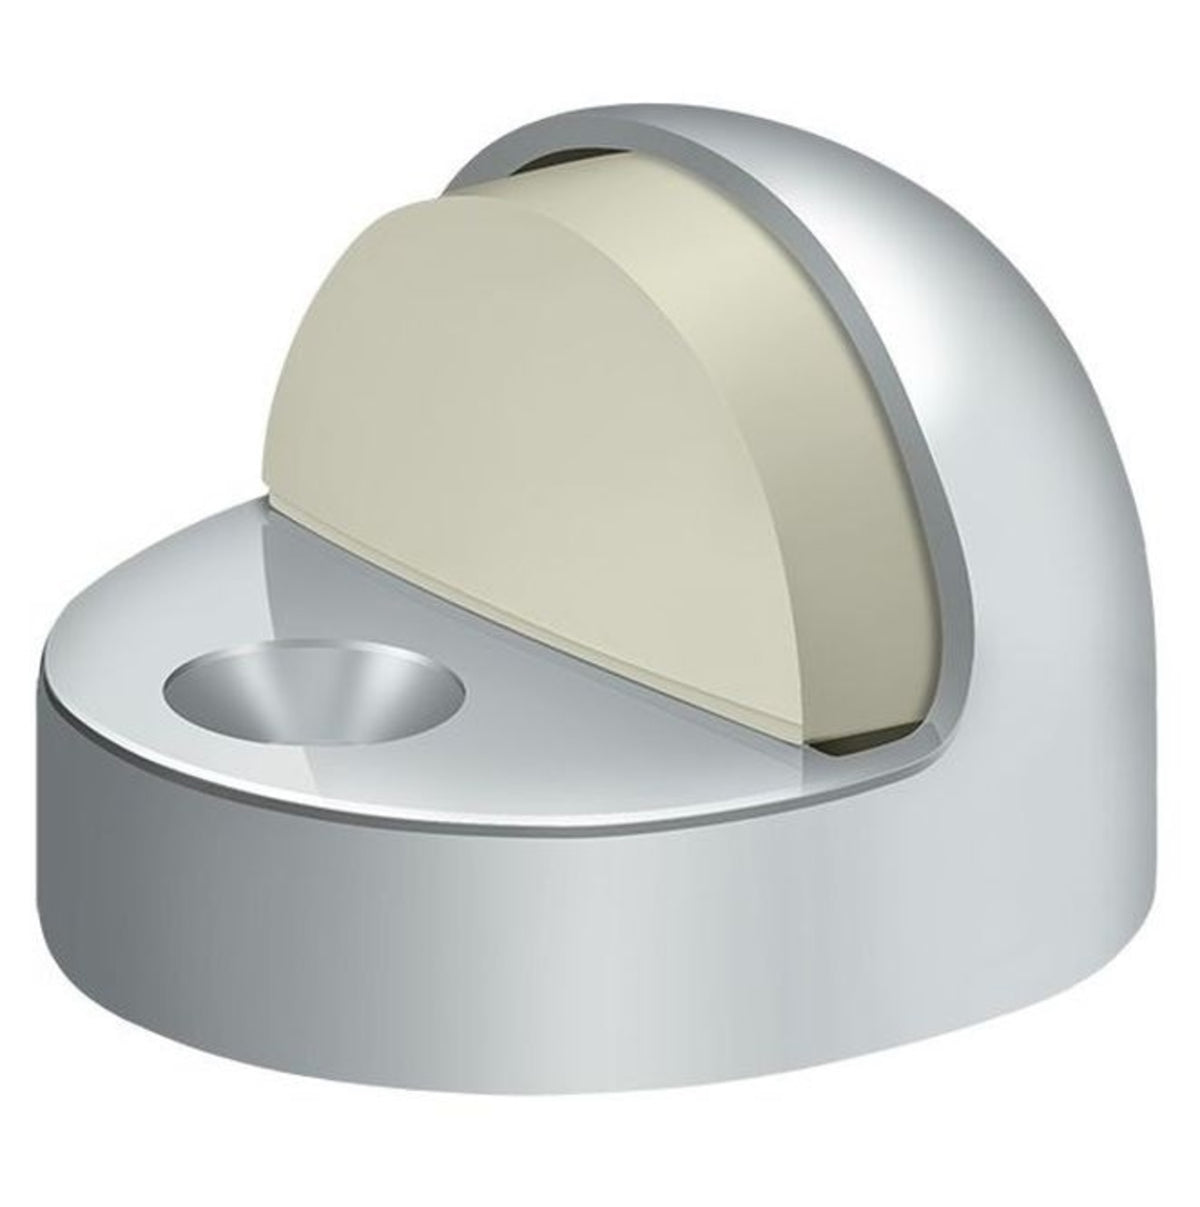 Deltana DSHP916U26 High Profile Dome Door Stop, Bright Chrome